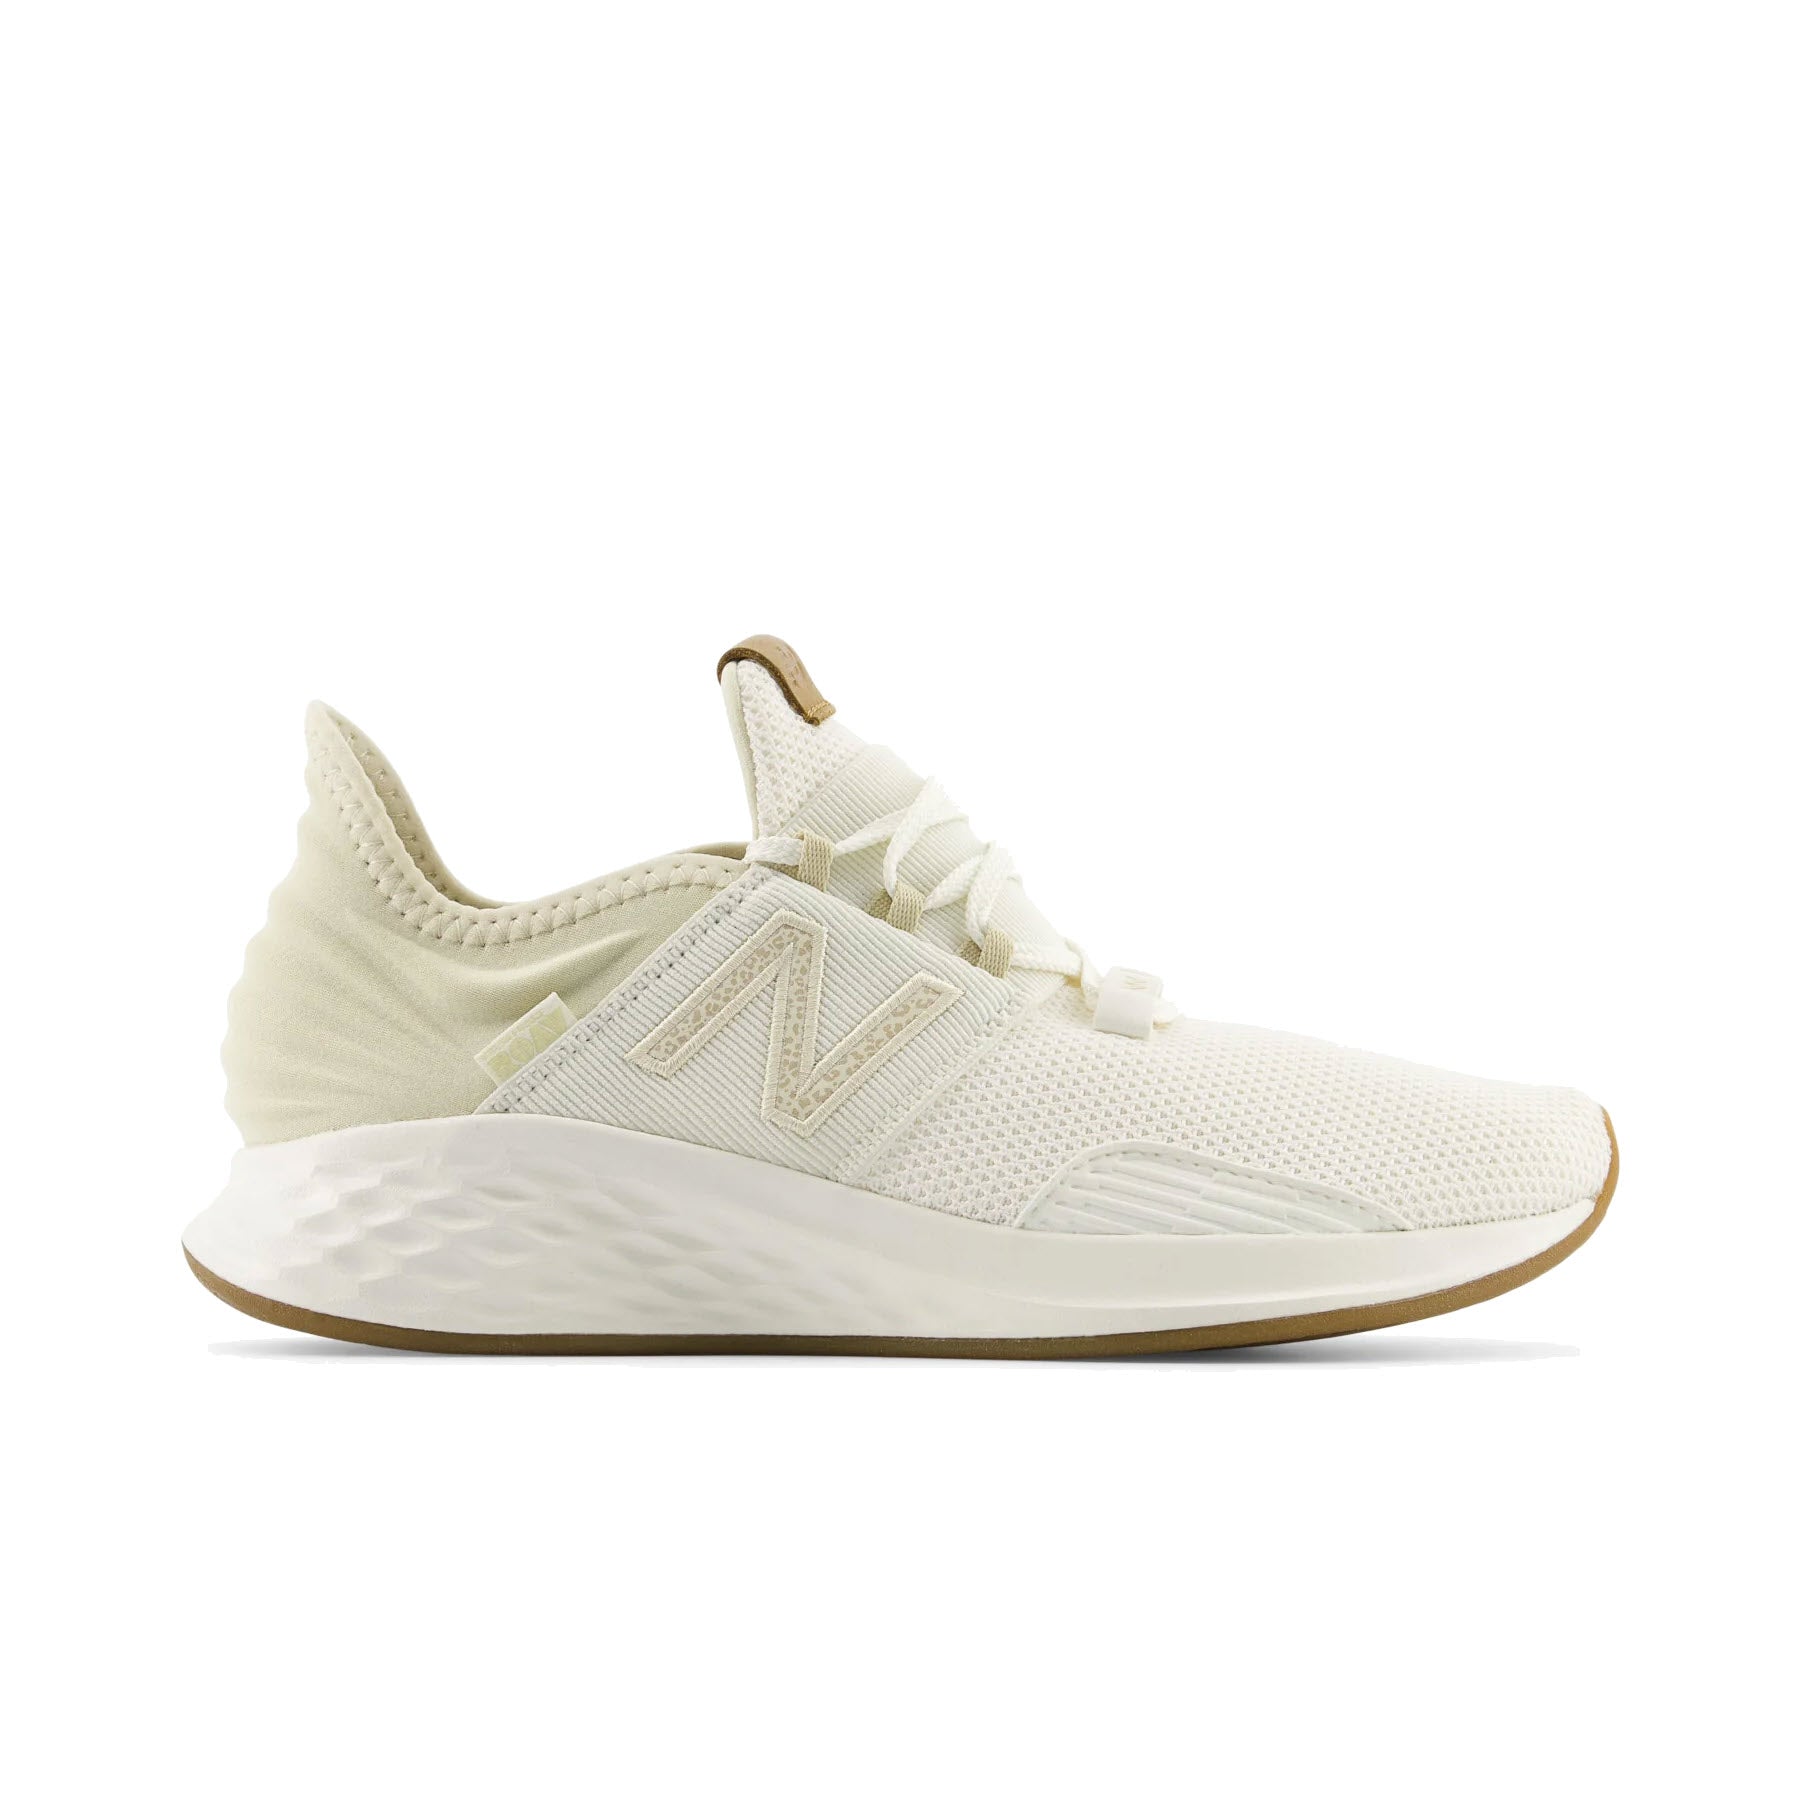 A single beige New Balance Fresh Foam Roav Turtledove/Sea Salt running shoe with an Ultra Heel design displayed against a white background, featuring a mesh upper and a prominent logo on the side.